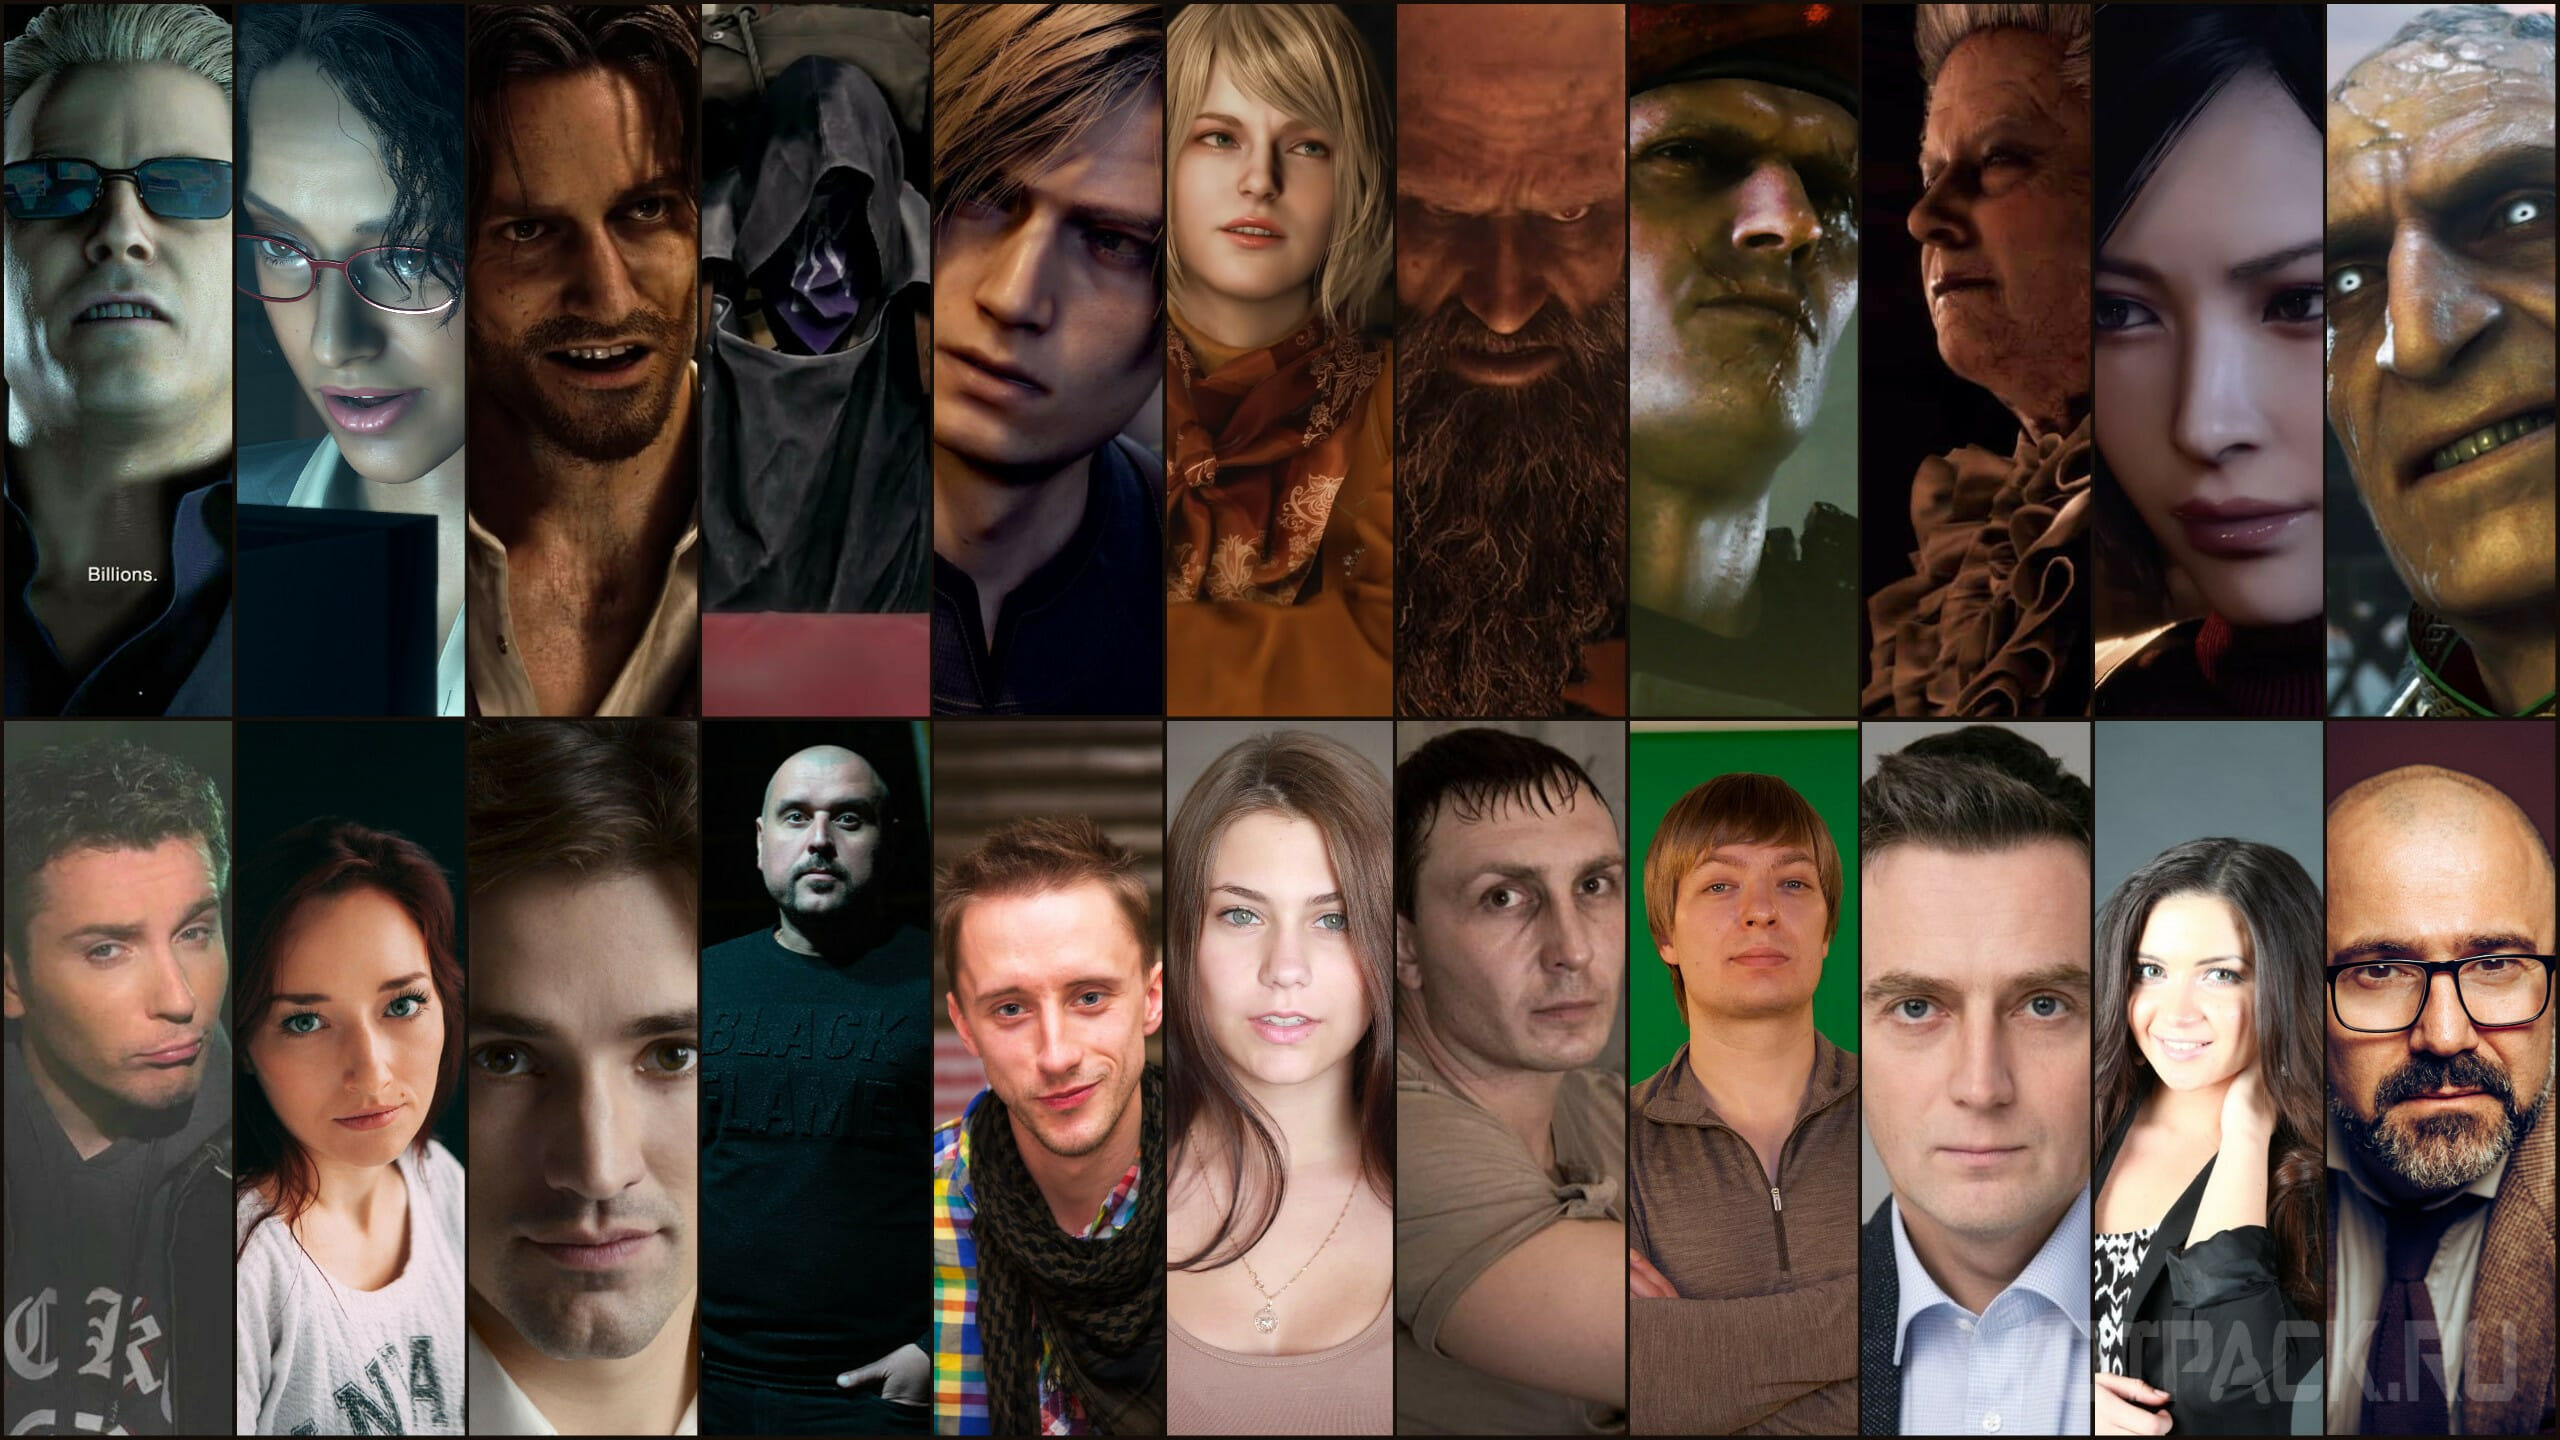 Resident Evil 4 Remake voice cast: All characters and voice actors